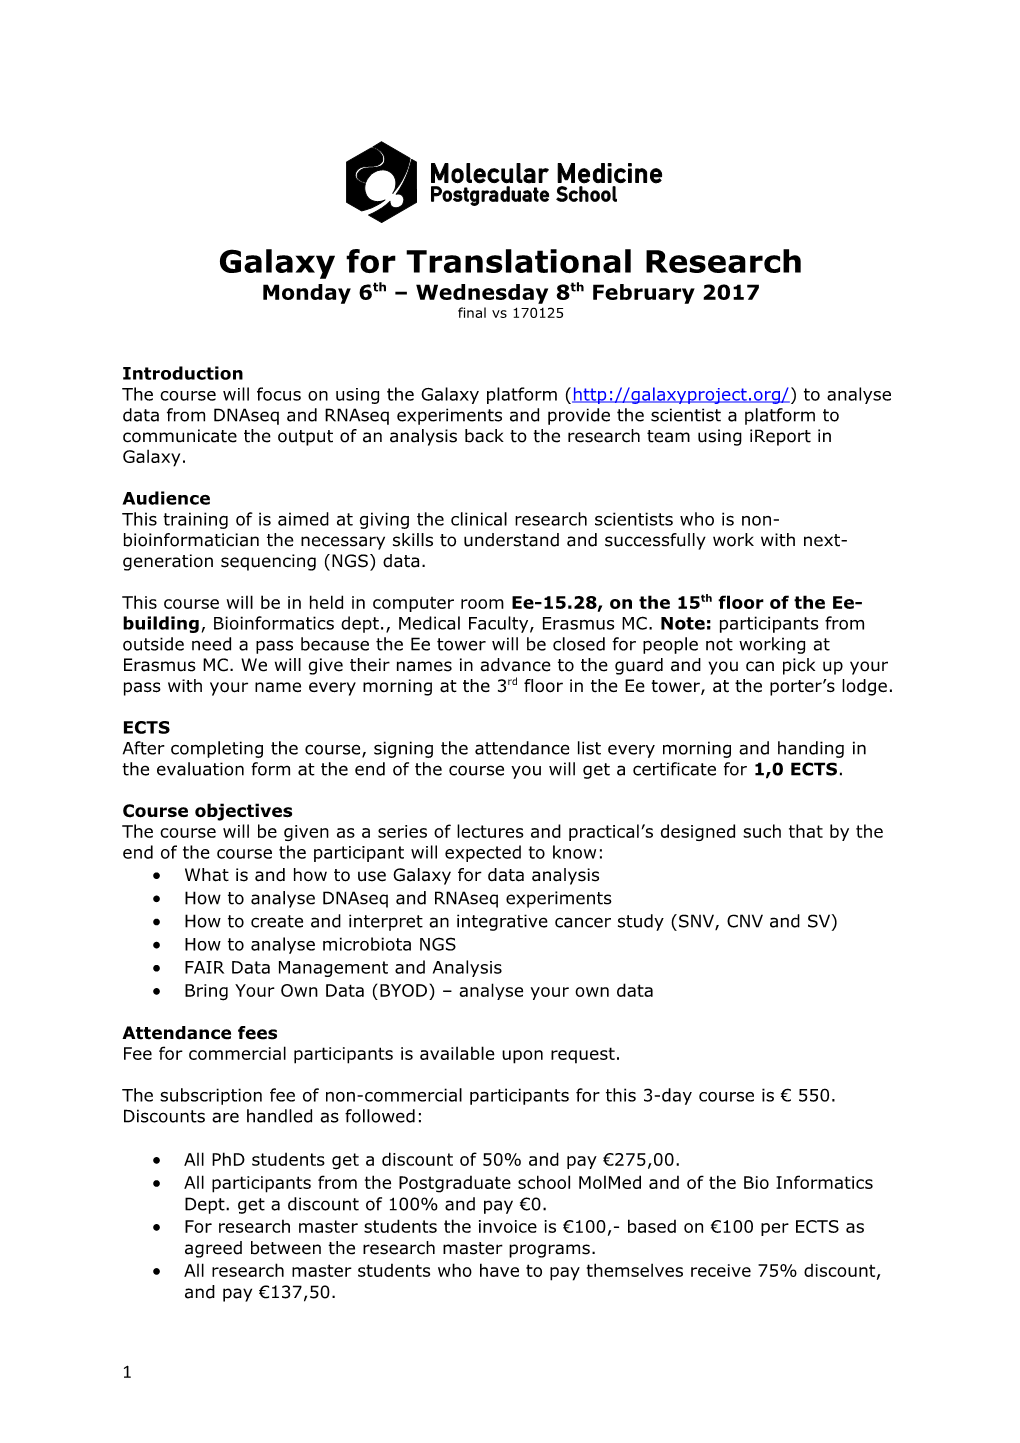 Galaxy for Translational Research